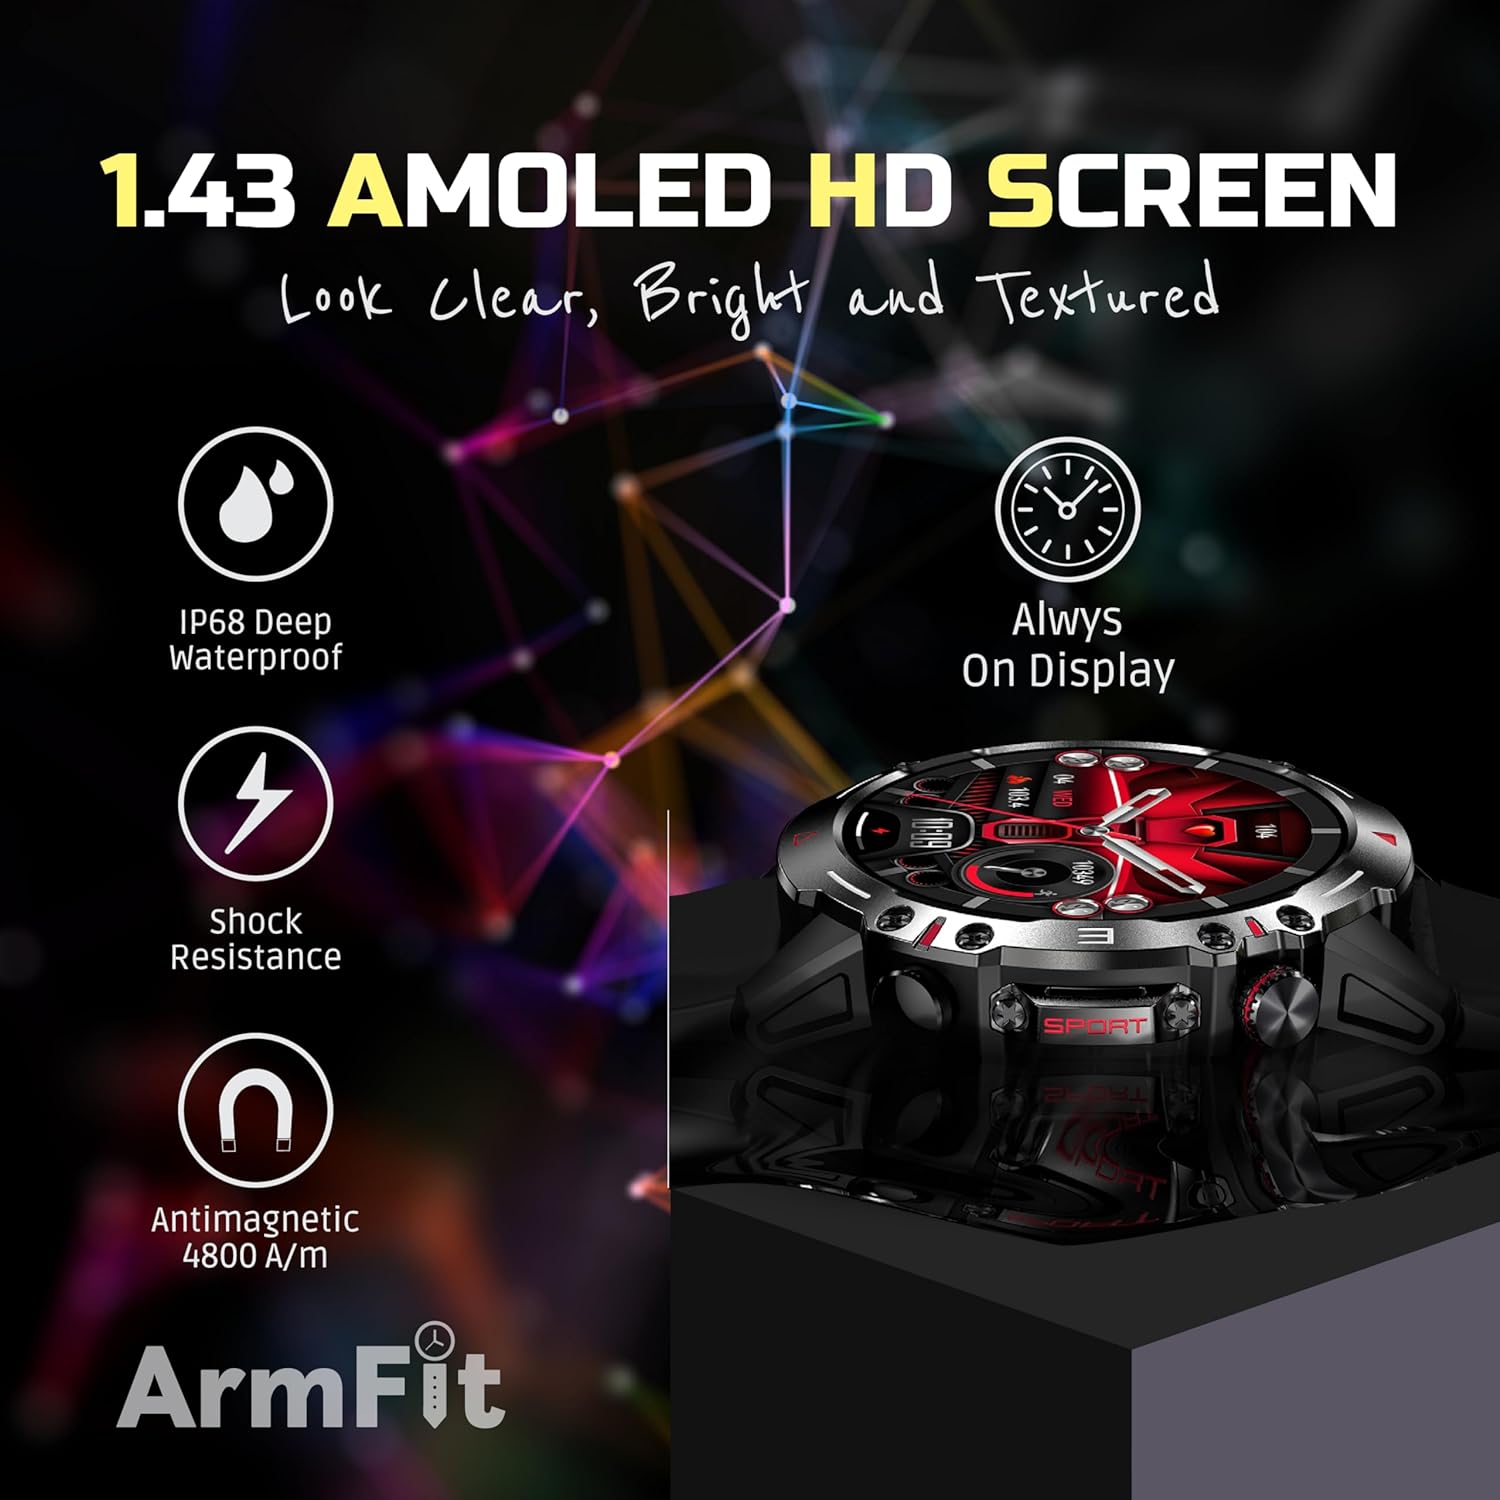 Armfit HULK Smart watch with AMOLED Always On Display Smartwatches for men, BT Calling Waterproof Fitness Watch with Heart Sleep Monitor for Android iOS (Black)